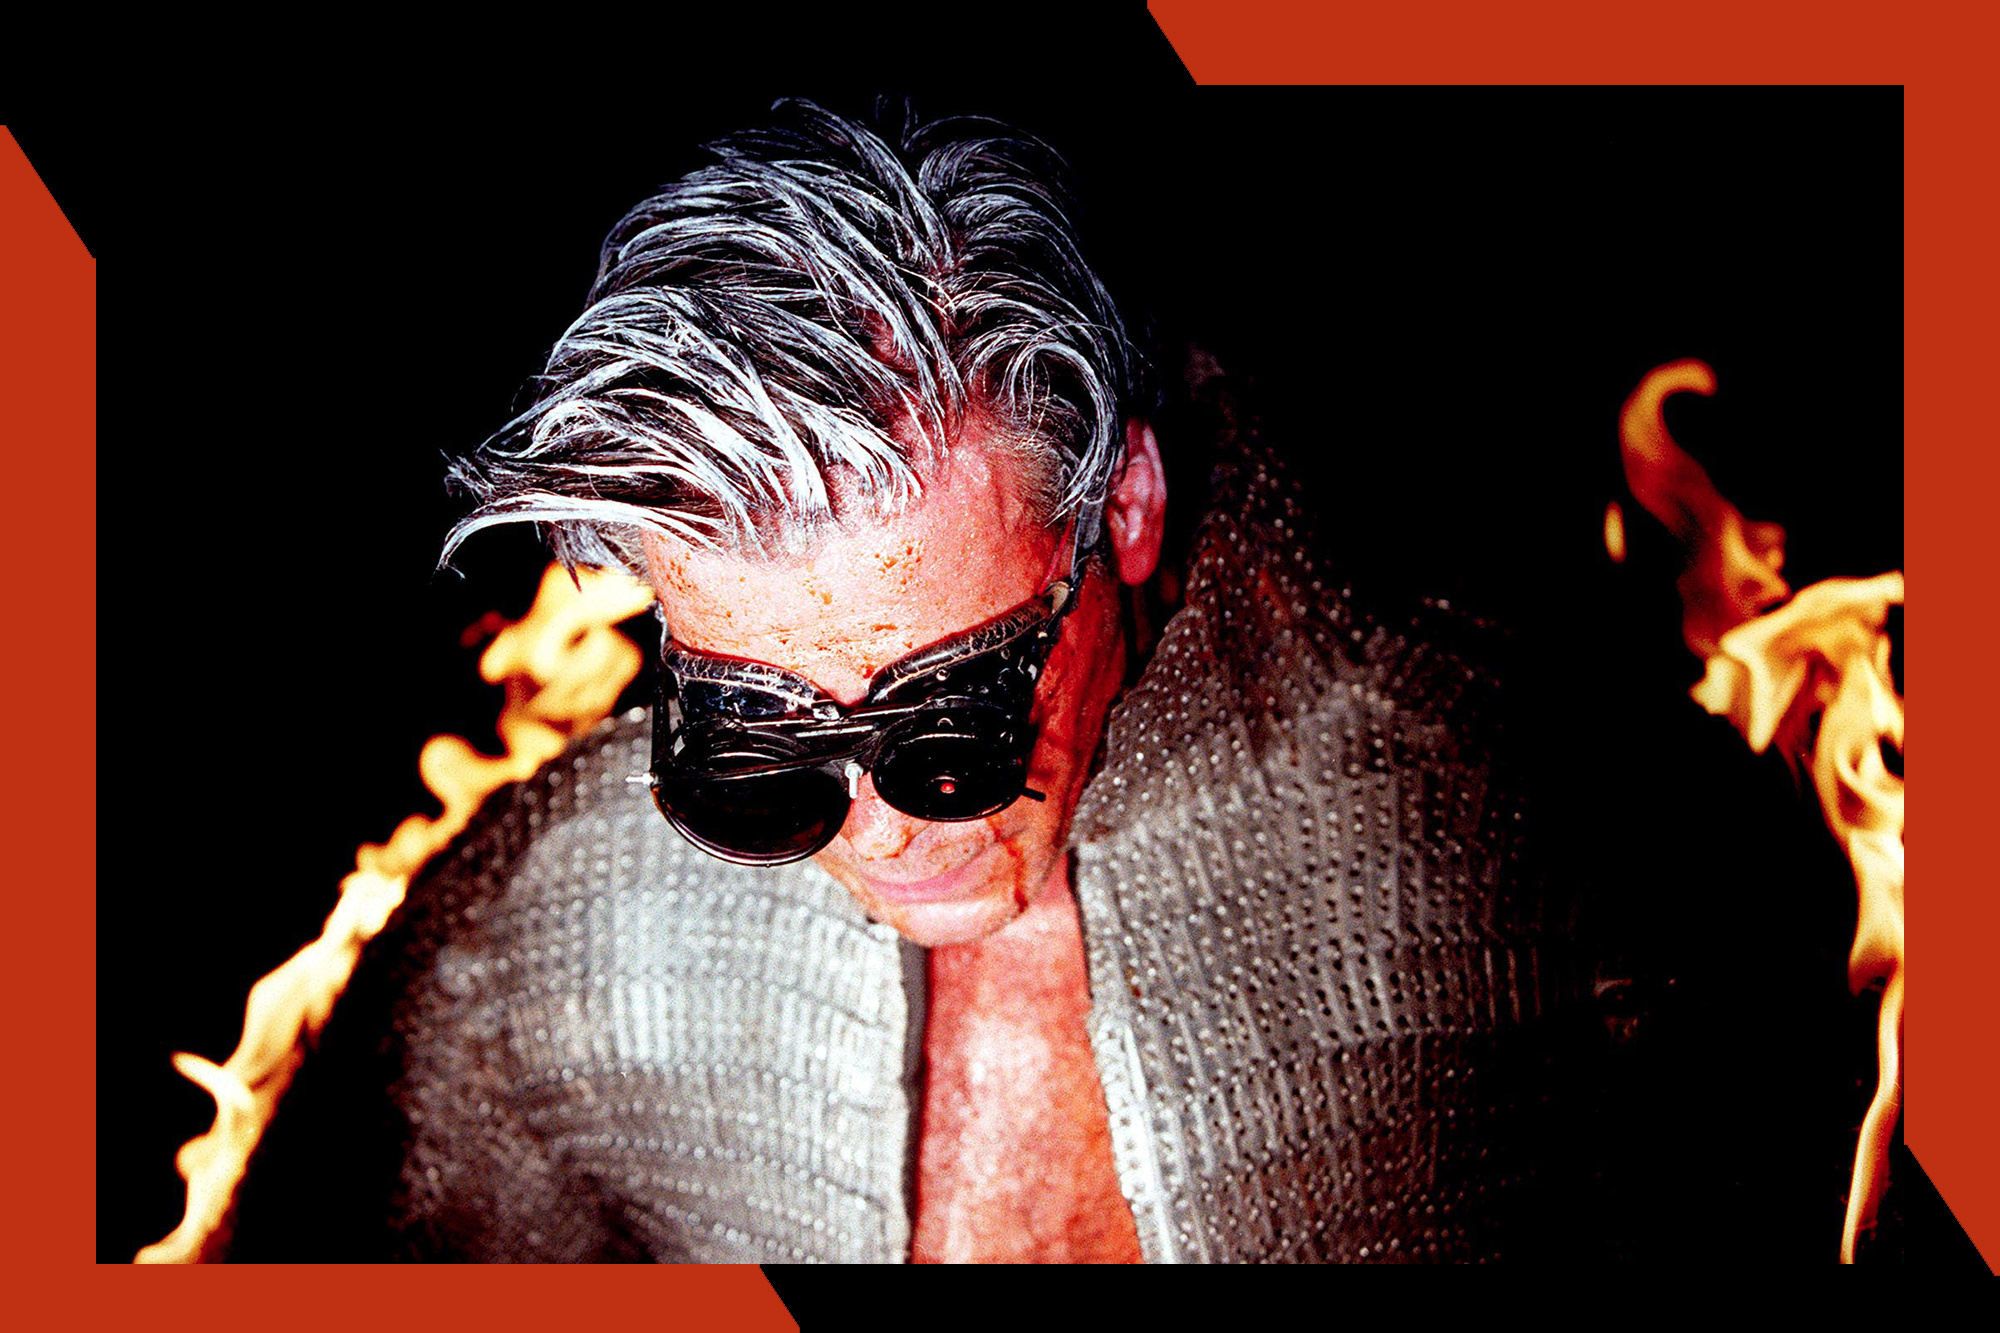 Till Lindemann wears thick glasses while looking down in a photo.